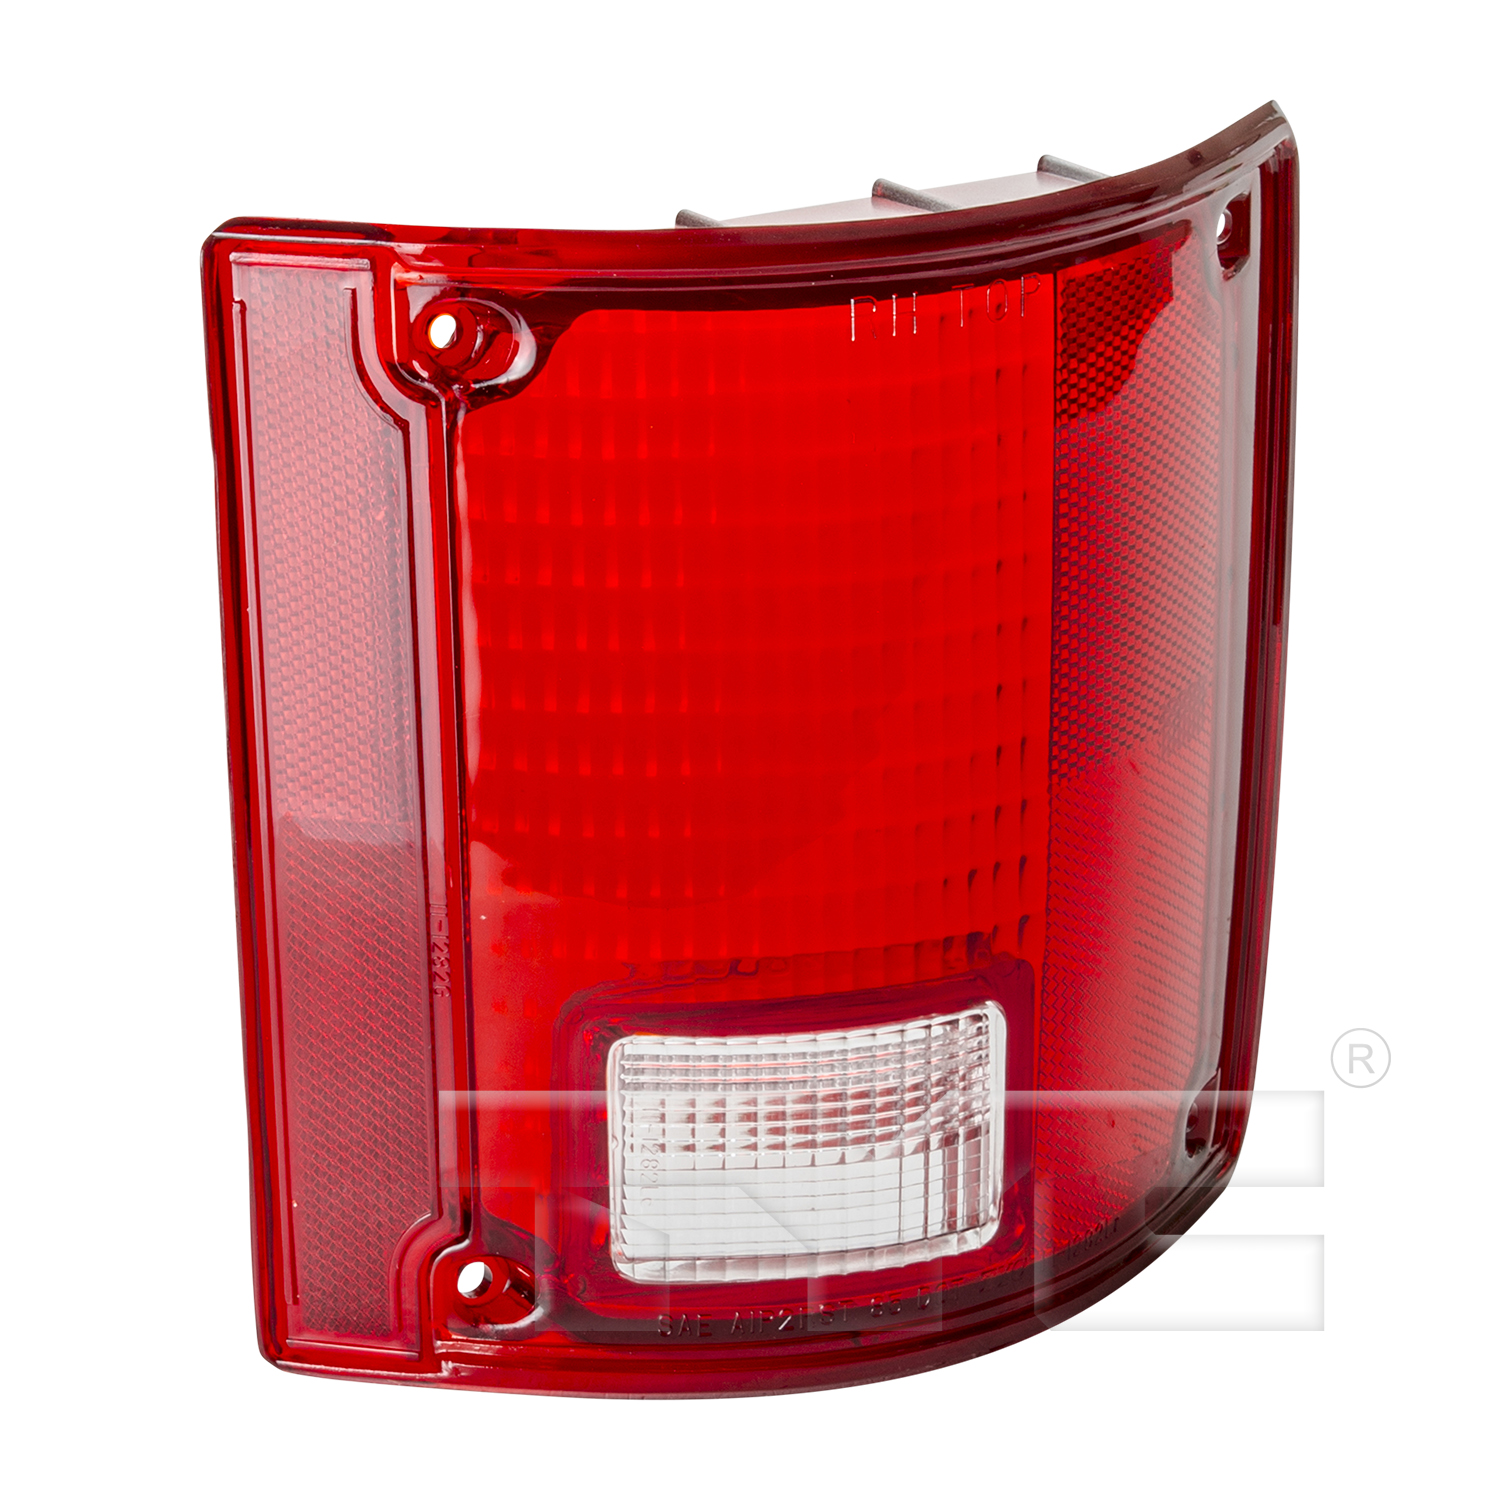 Aftermarket TAILLIGHTS for CHEVROLET - R10 SUBURBAN, R10 SUBURBAN,87-88,RT Taillamp lens